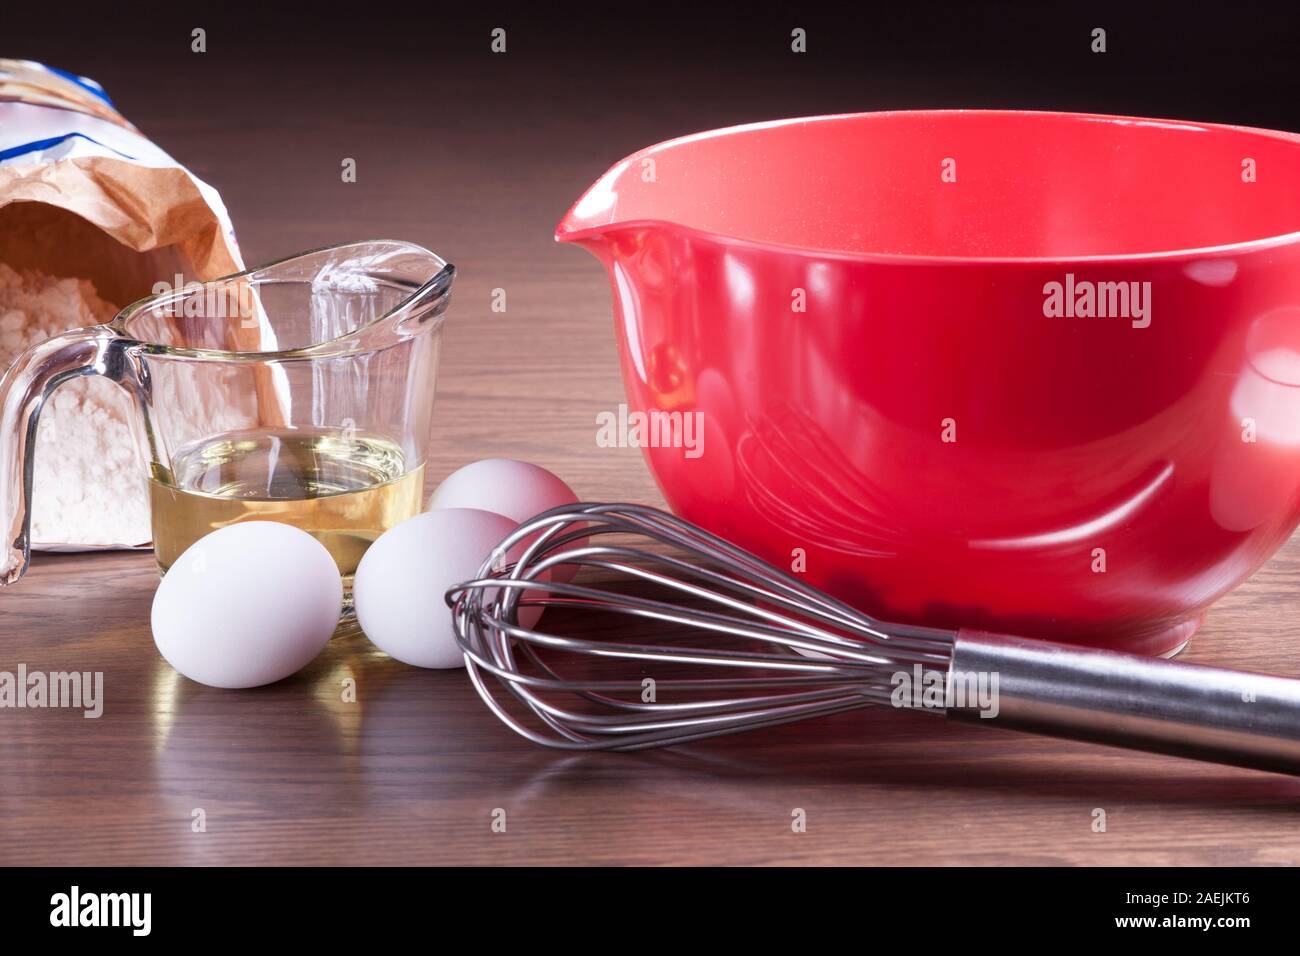 https://c8.alamy.com/comp/2AEJKT6/closeup-on-ingredients-and-tools-to-cook-a-homemade-cake-from-scratch-2AEJKT6.jpg